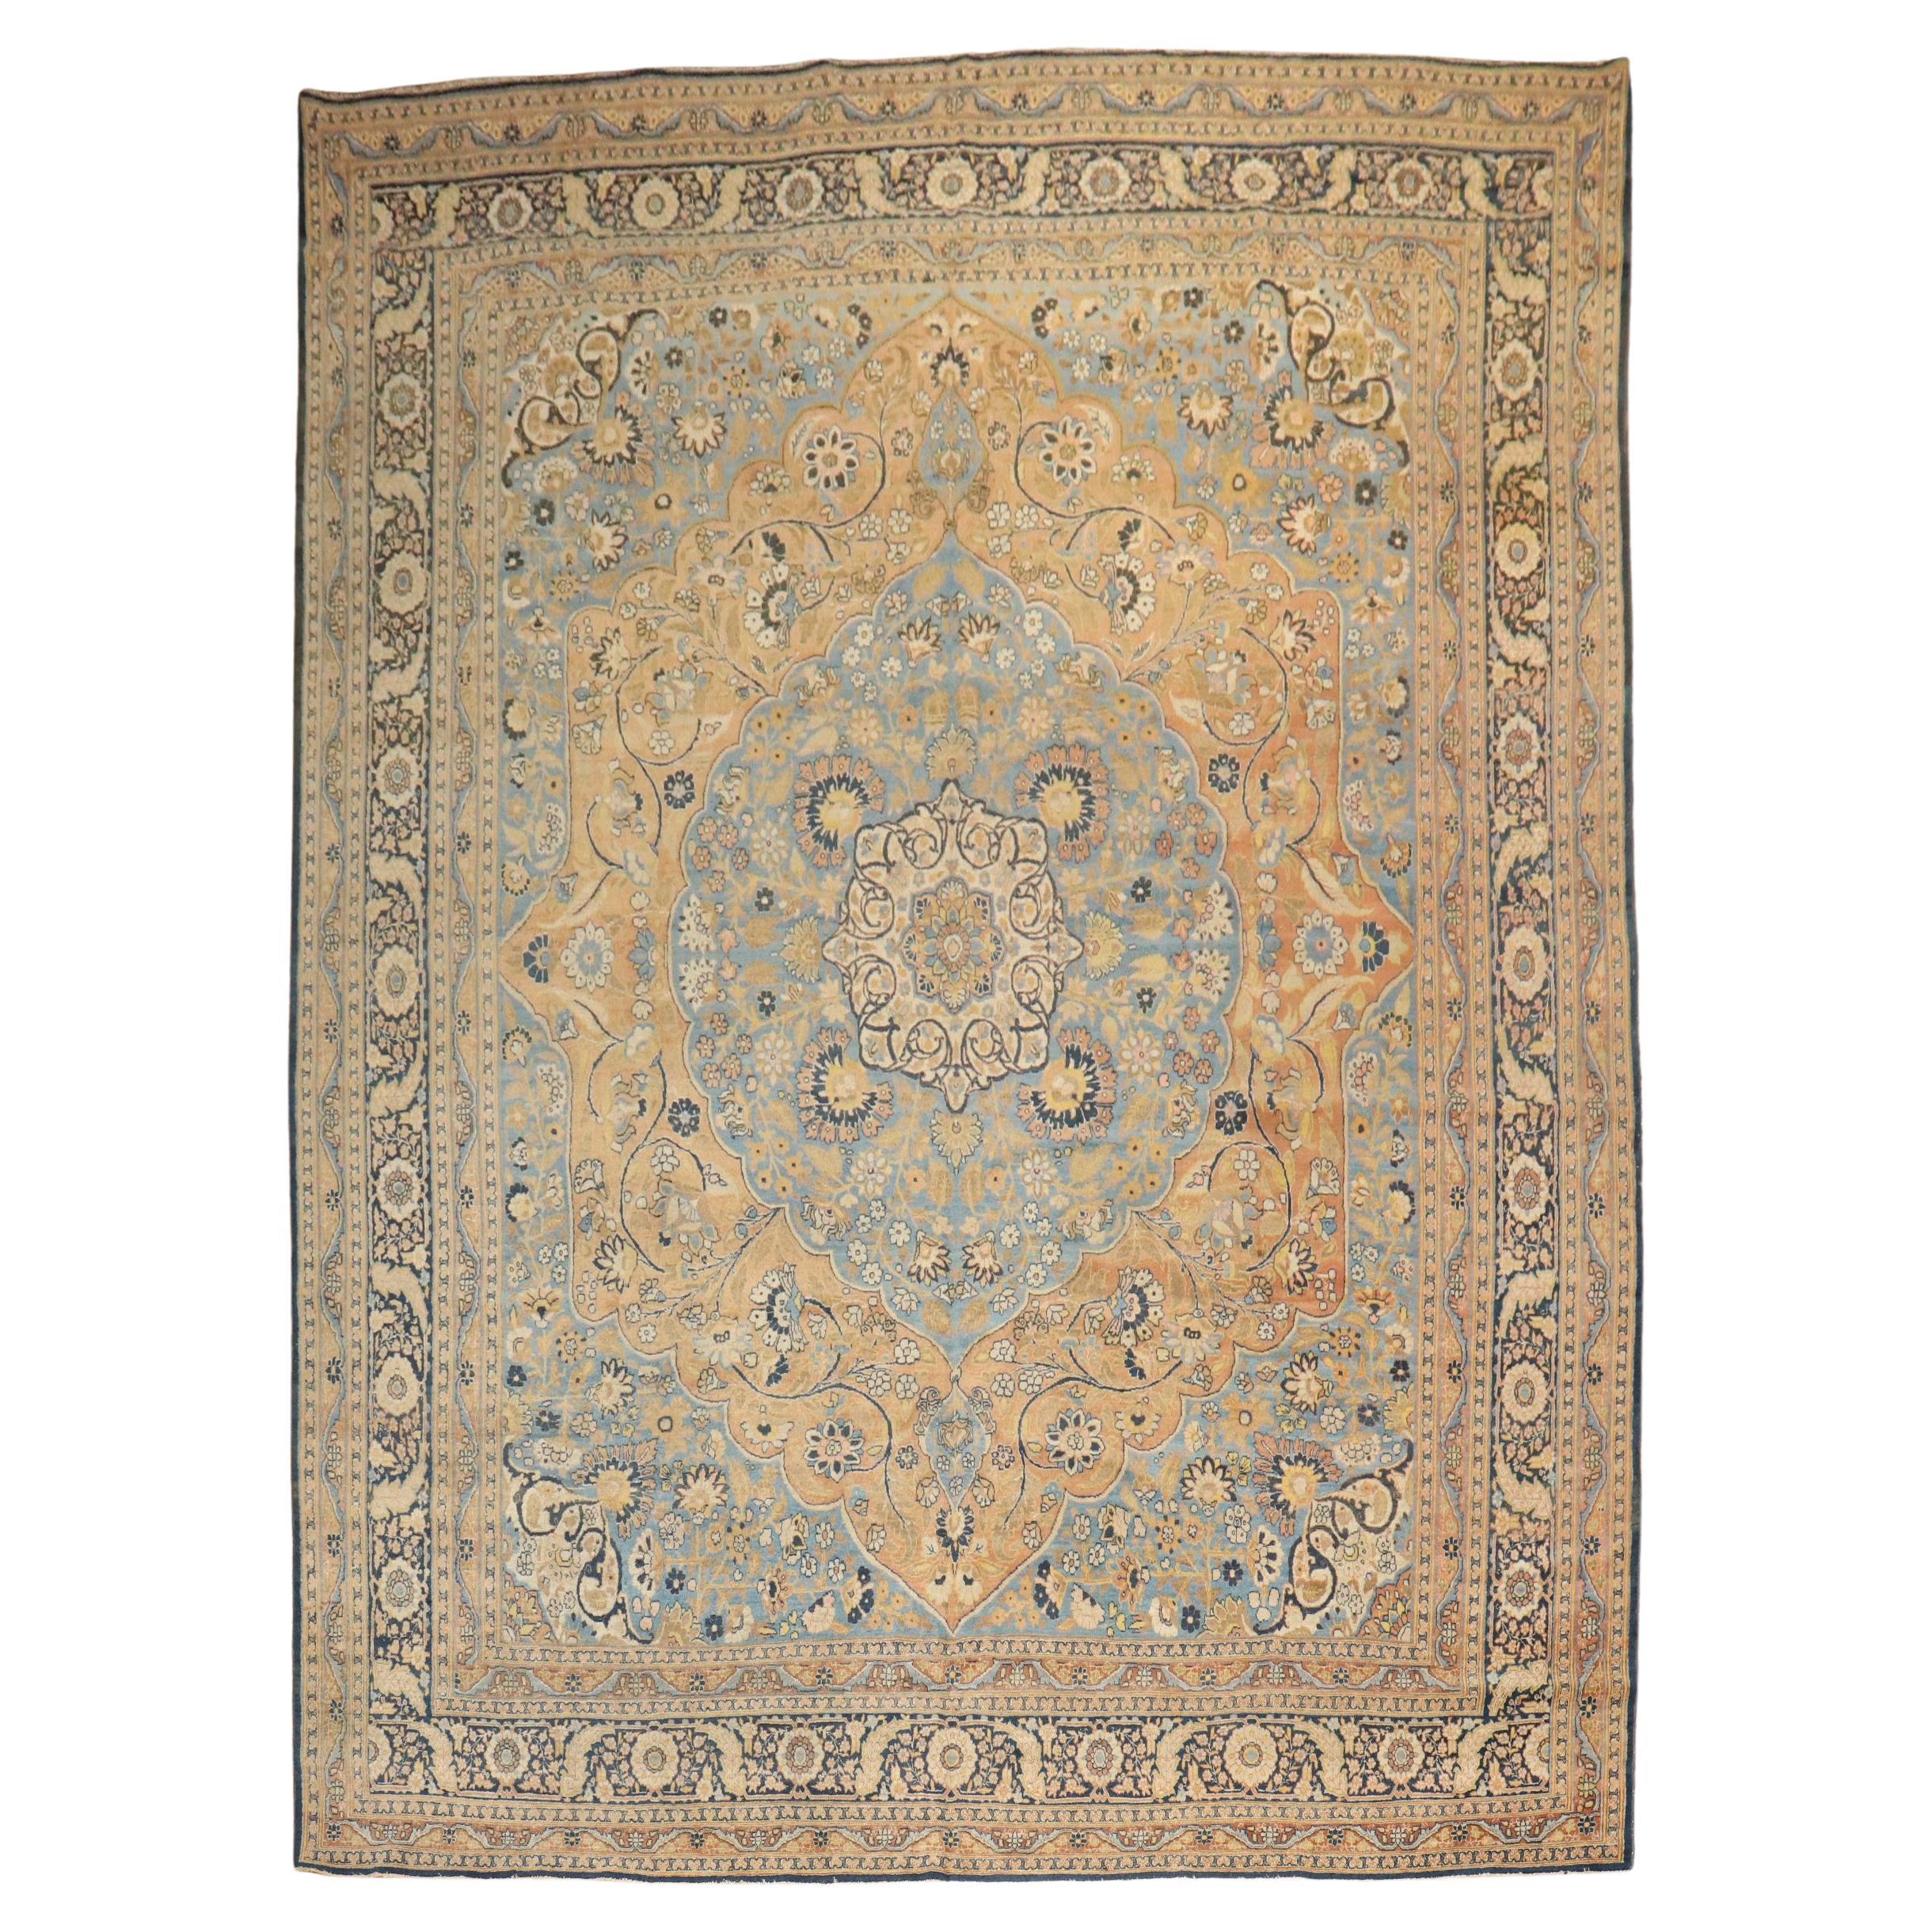 The Collective Early 20th Century Room Antique Persian Tabriz Rug